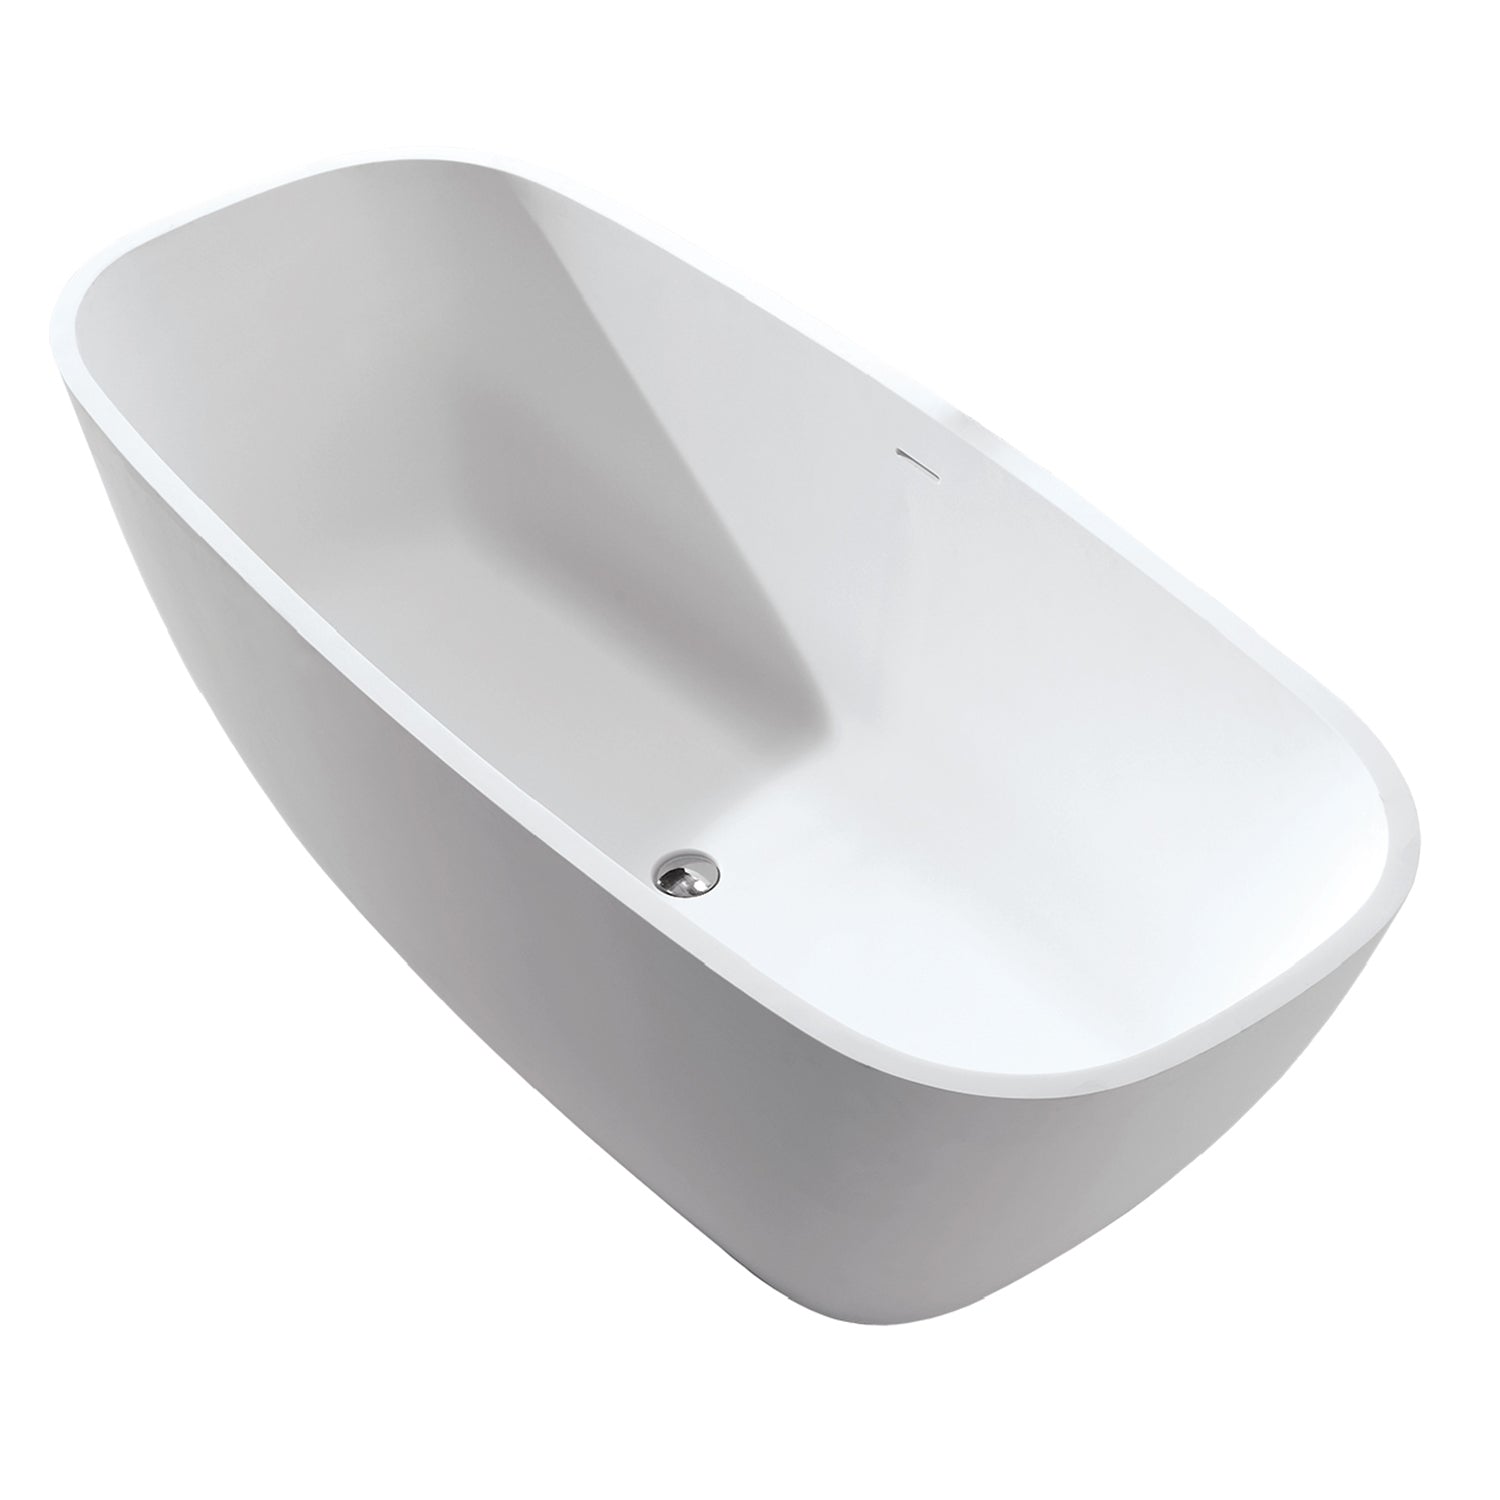 DAX Oval Freestanding Matte Solid Surface Bathtub with Central Drain and Overflow, Fiberglass Reinforcement, Full Immersion, Stainless Steel Frame, 67-4/5 x 29-1/4 x 21-5/8 Inches (BT-AB-B037)